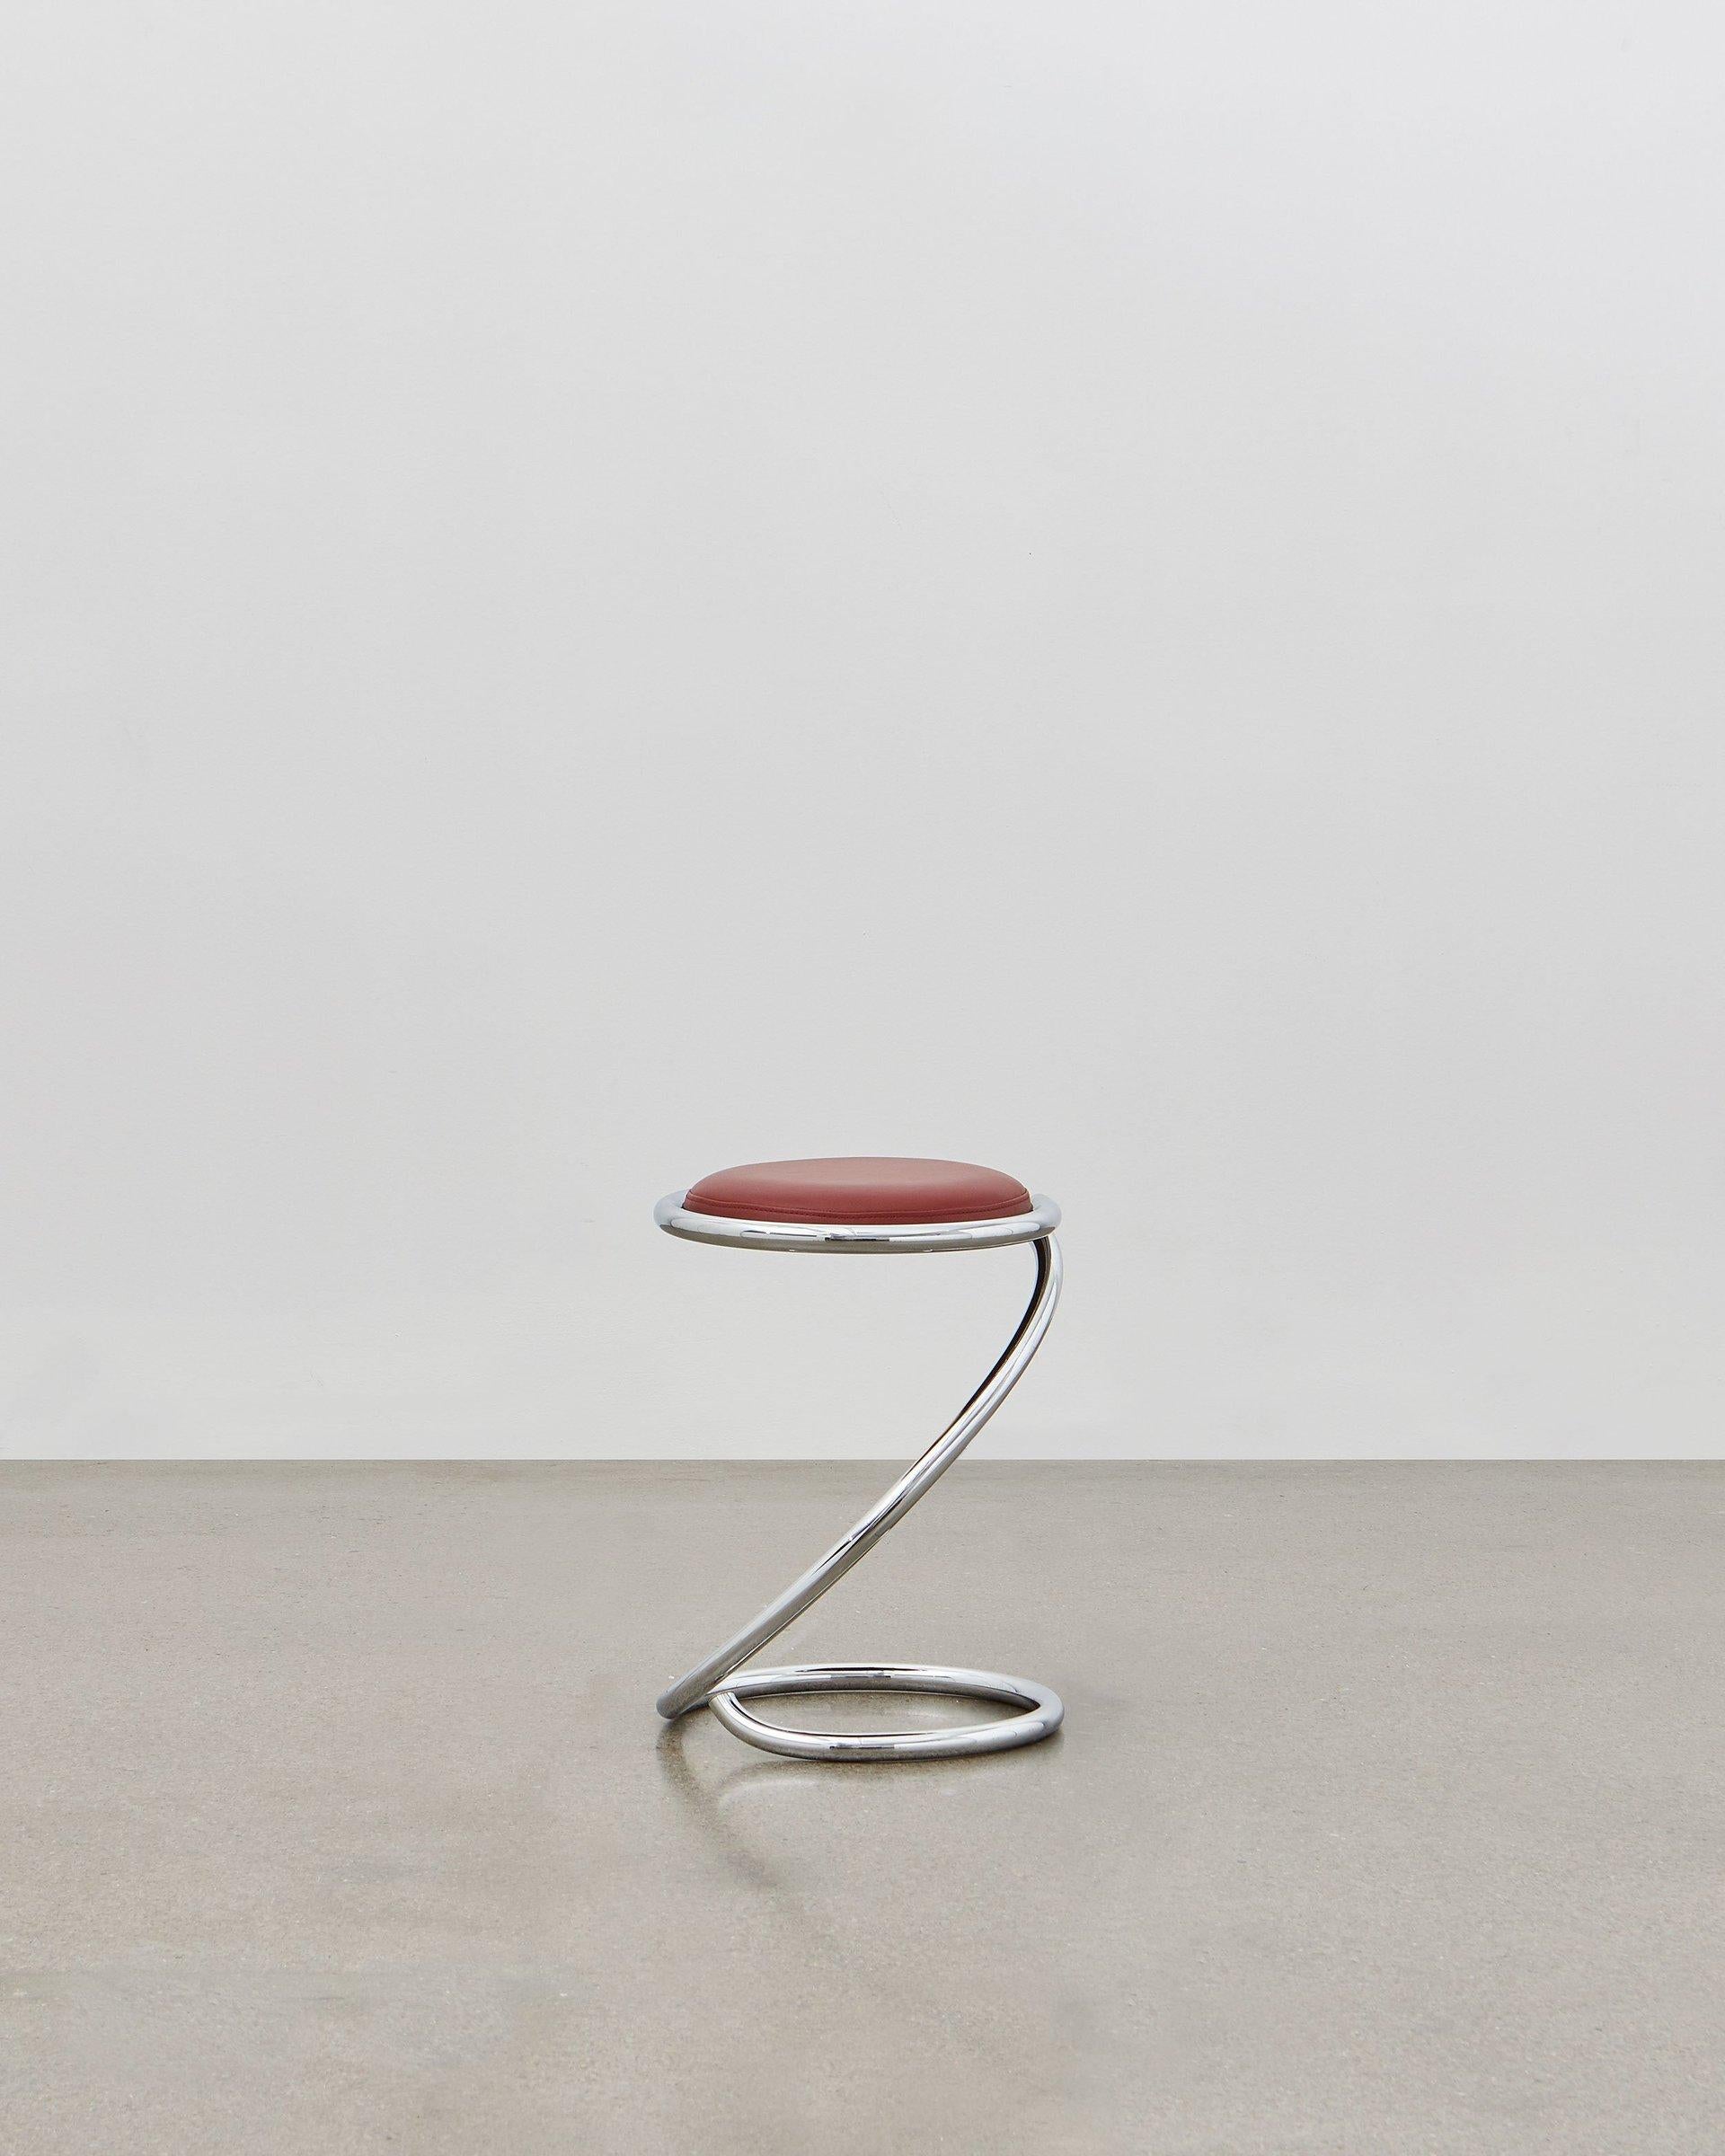 The PH Snake Stool is completely true to the original design and the use of chromed steel tubes, however updated for the 21st century to be available with wood seating in five colorways to coordinate with the ever-popular Poul Henningsen lighting